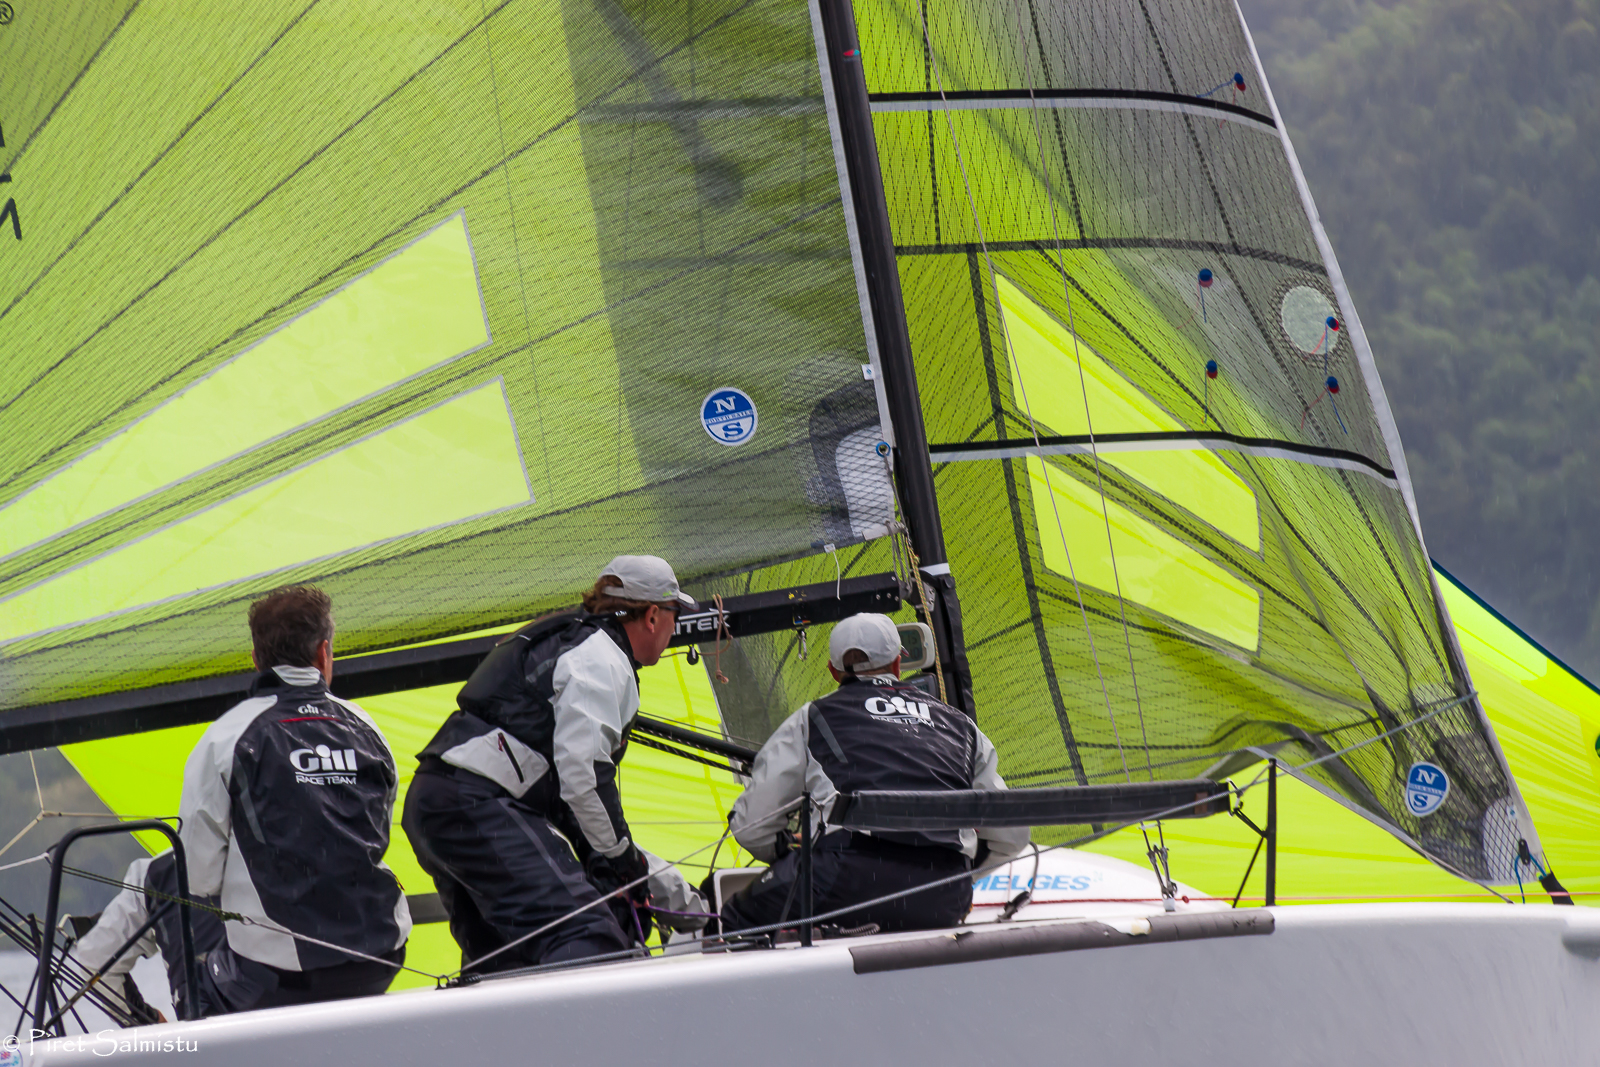 Miles Quinton's Gill Race Team GBR694 on Lake Attersee, June 2016 - photo Piret 